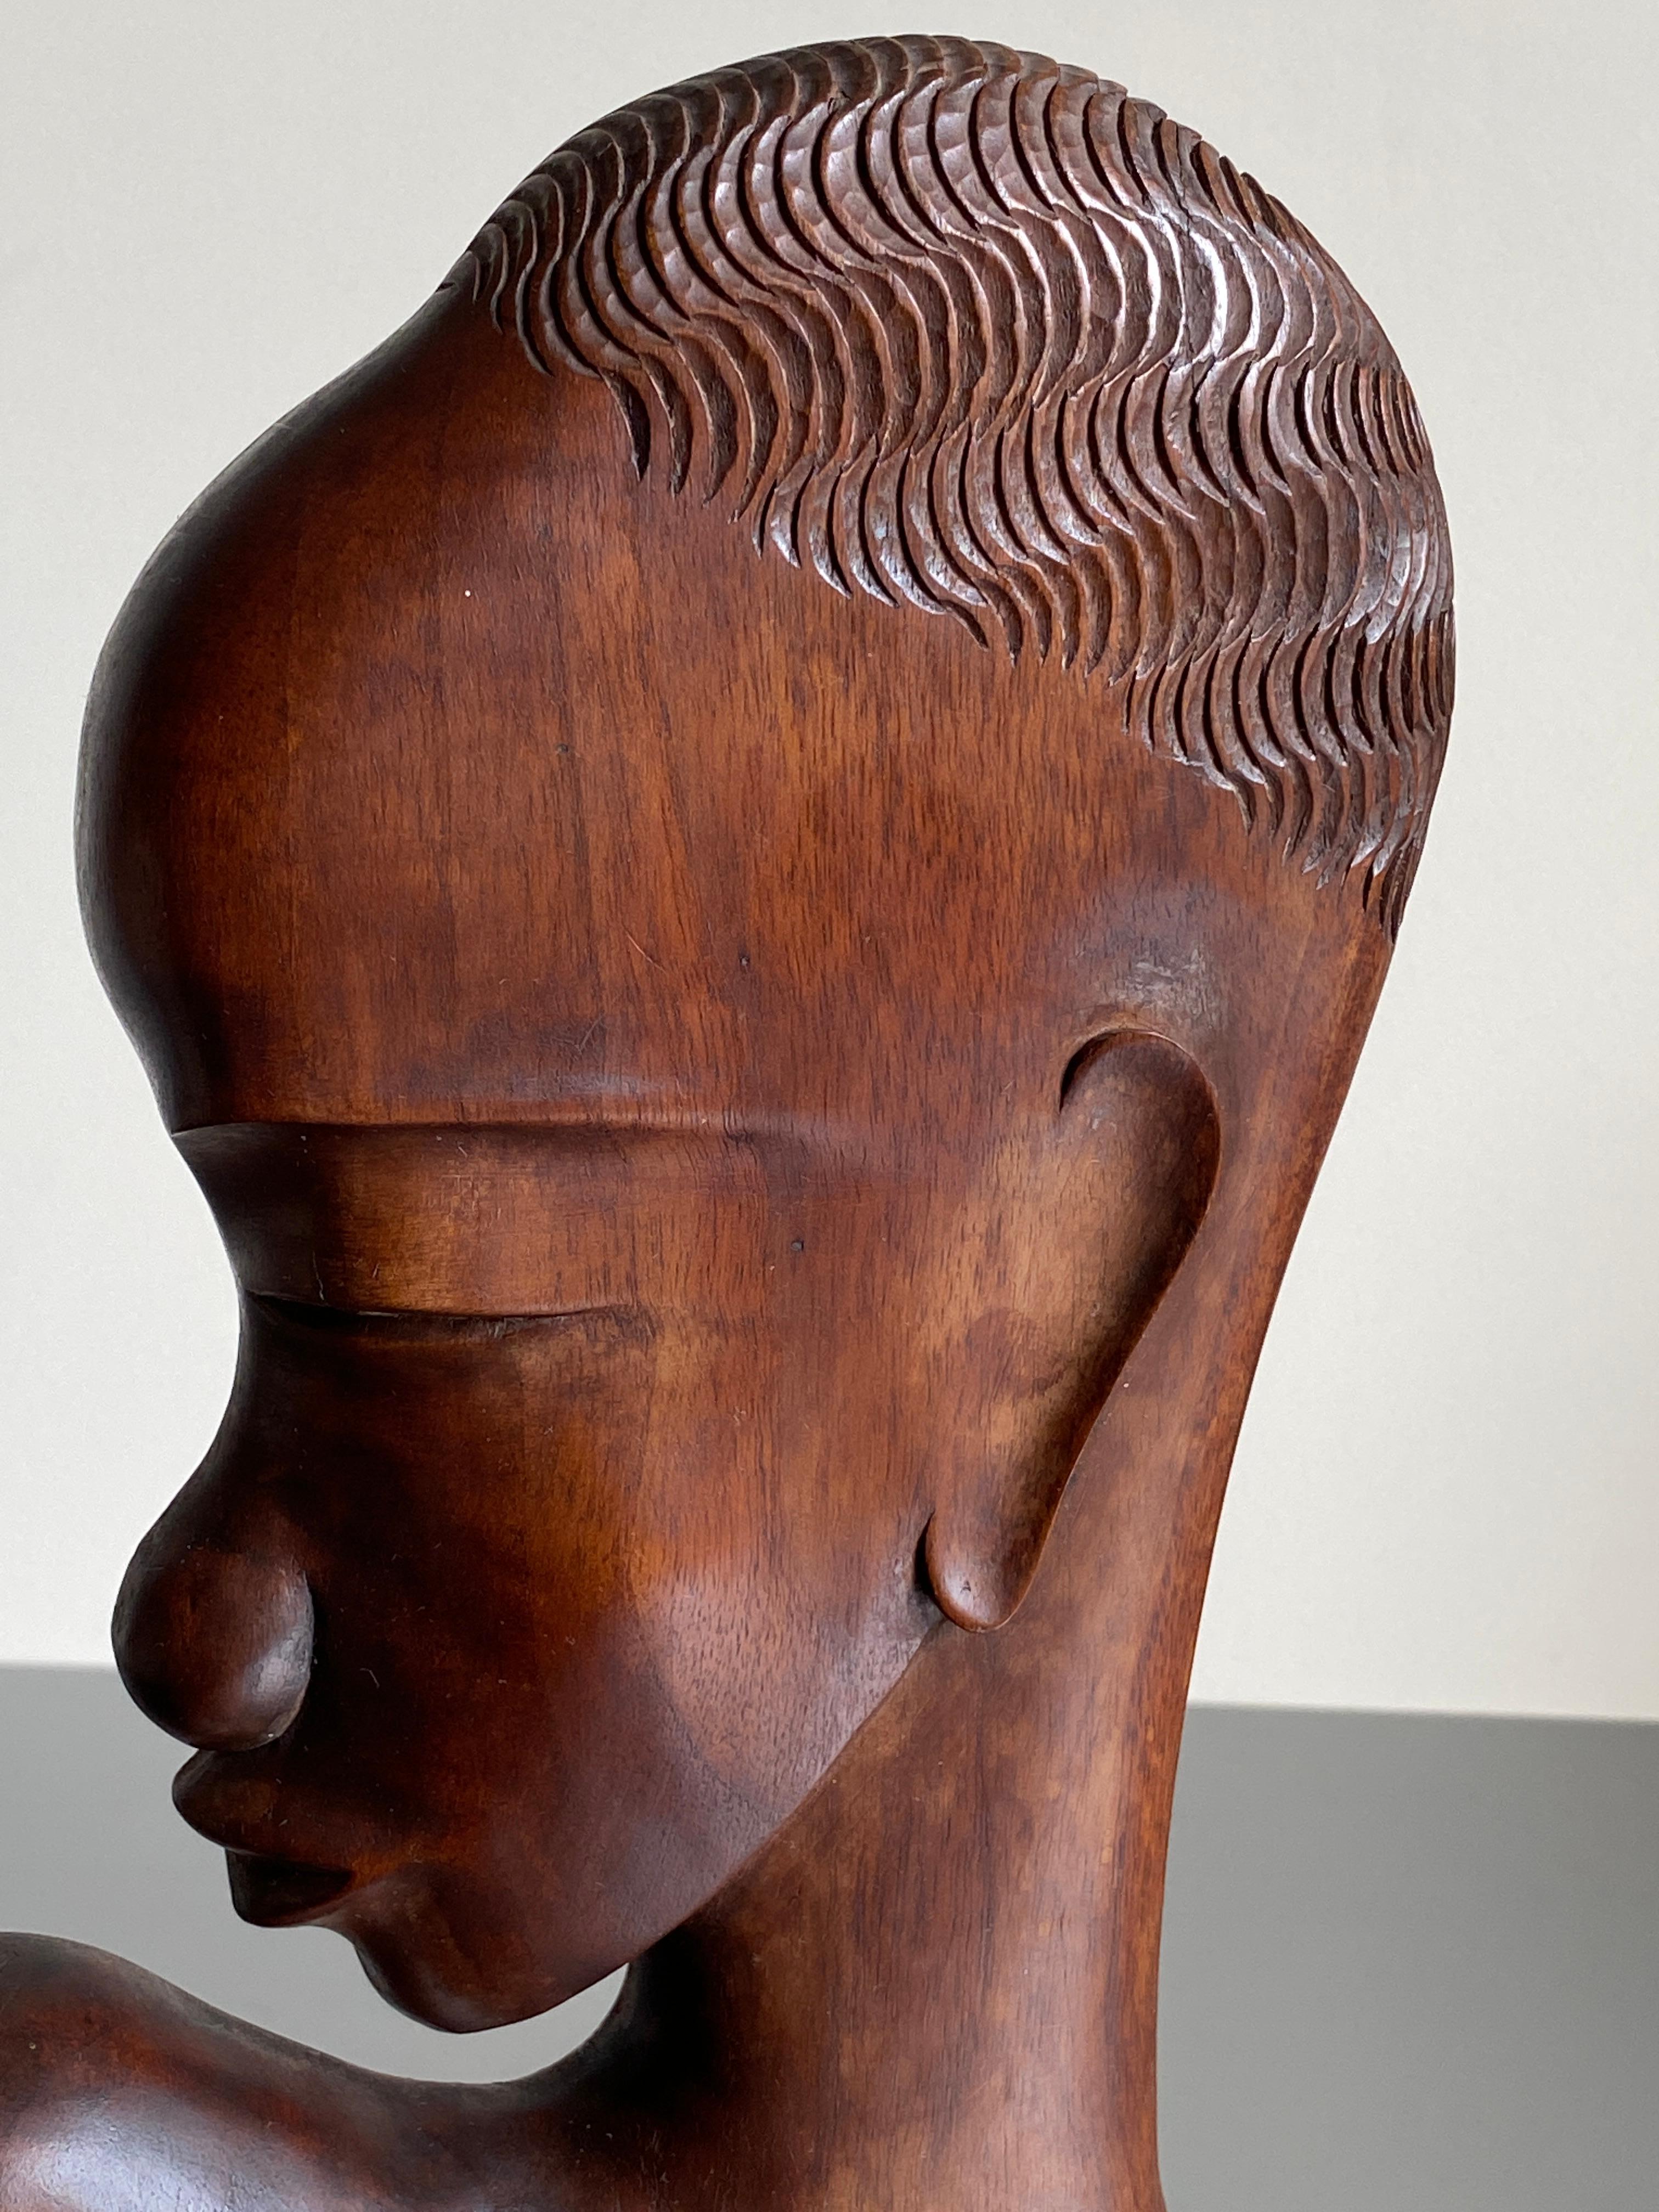 
 Free-Standing Art Deco African Sculptural Bust in the style of Karl Hagenauer

The bust has been inspired by other sculptural Art Deco pieces made by Karl Hagenaur and dates to the 1930s. Beautifully proportioned with the finely carved lines